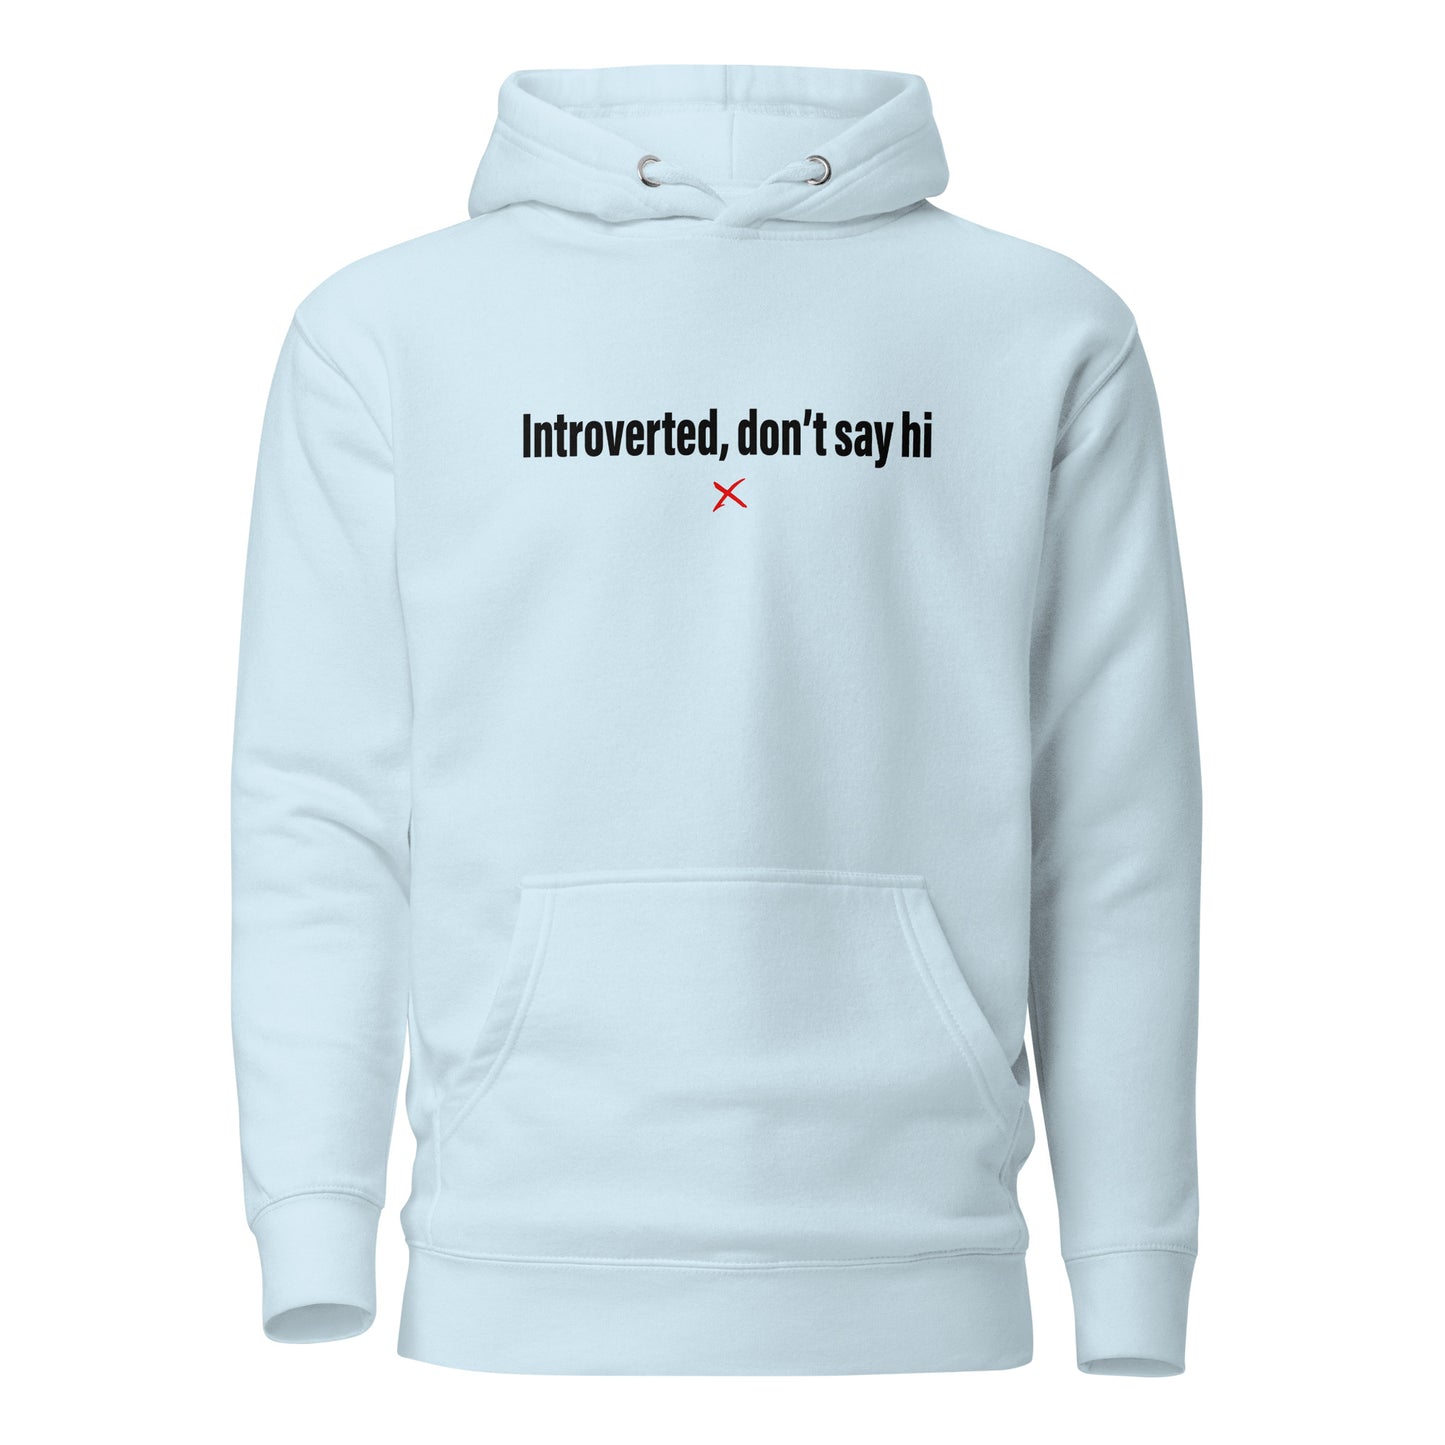 Introverted, don't say hi - Hoodie